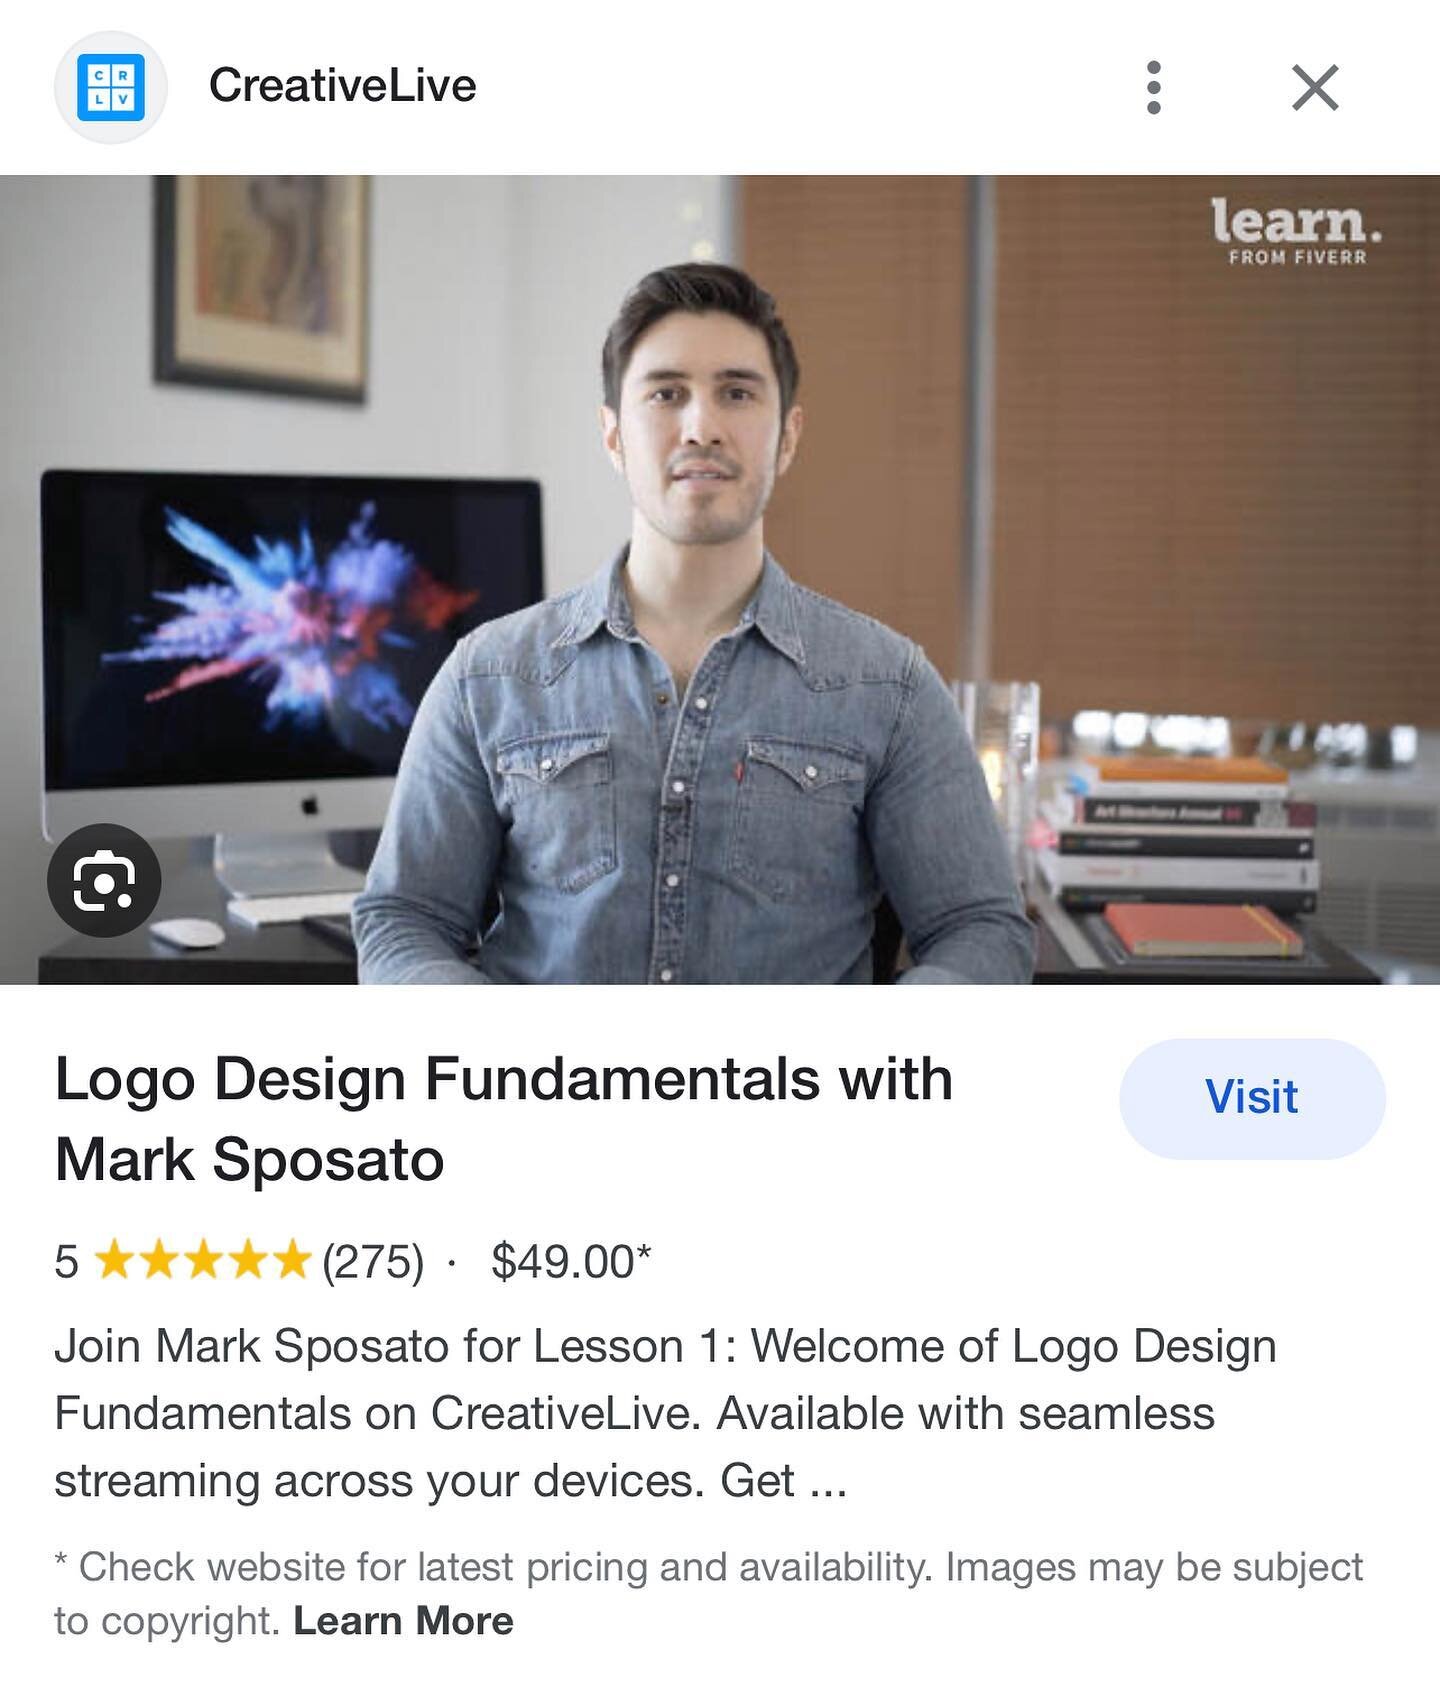 5/5 stars, out of 275 reviews 🥰

Guess my logo design class is a hit! Find out more on Creative Live or Learn from Fiverr

⭐️ ⭐️ ⭐️ ⭐️ ⭐️ 

LINK IN BIO

#logo #logodesign #logoclass #logolesson #logodesignclass #logocourse #logodesigncourse #onlinec